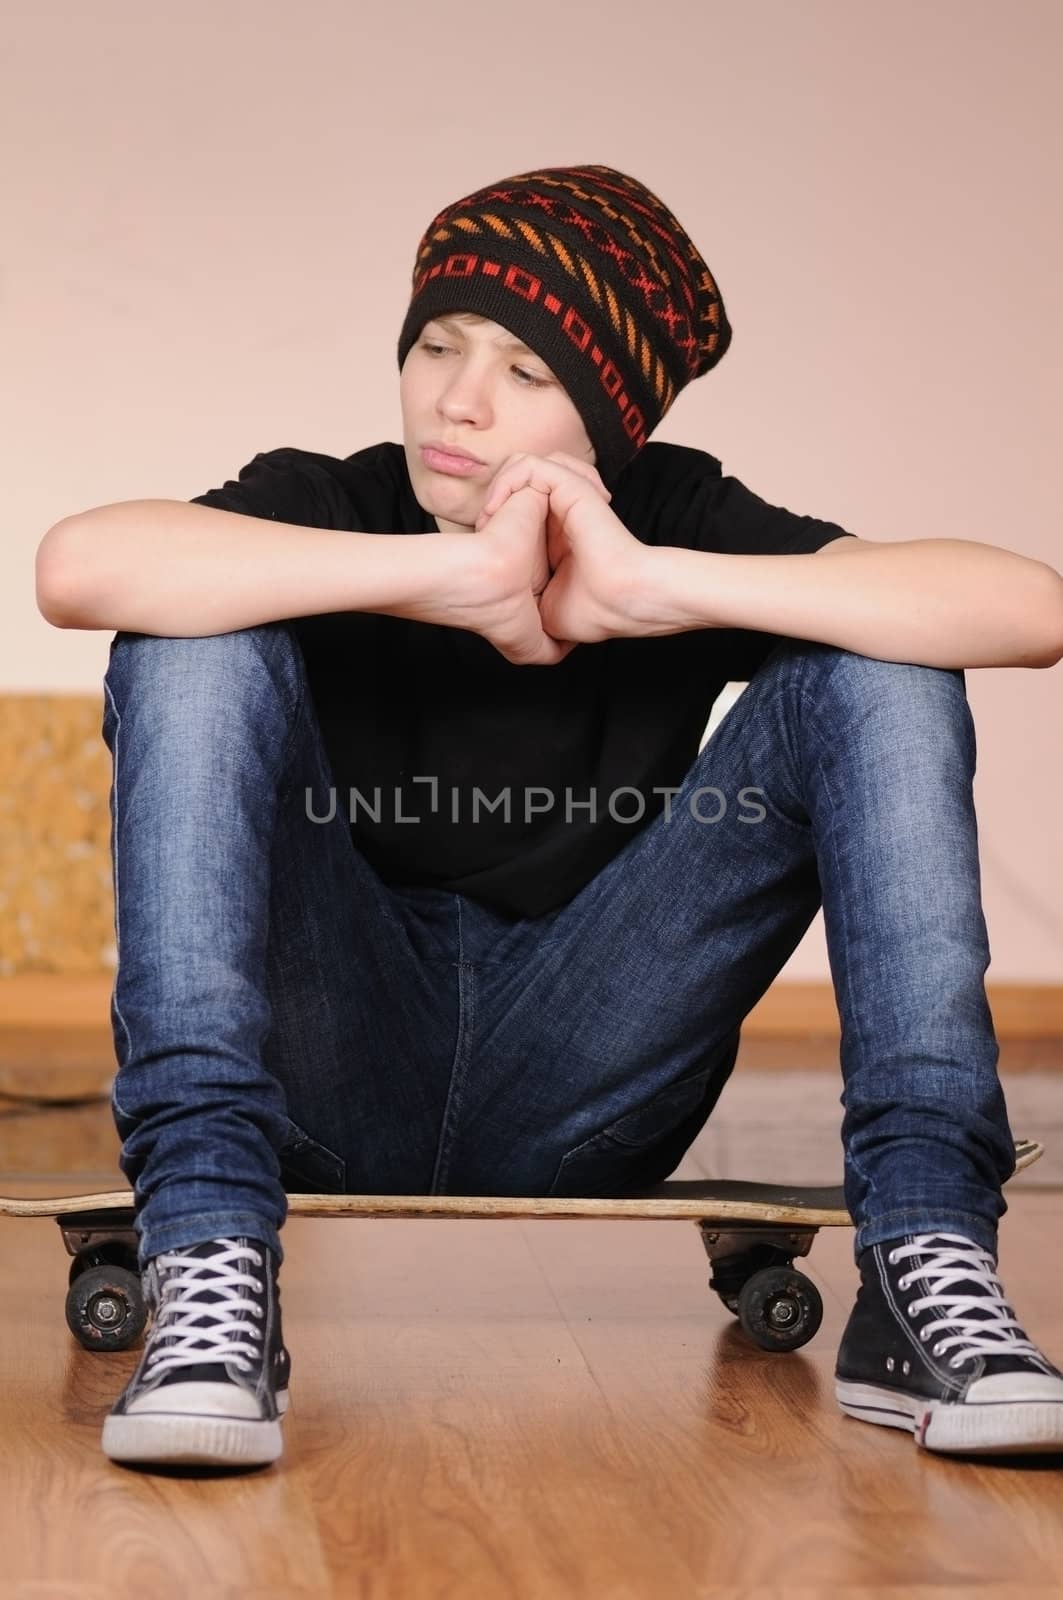 The teenager with a skateboard and in a hat